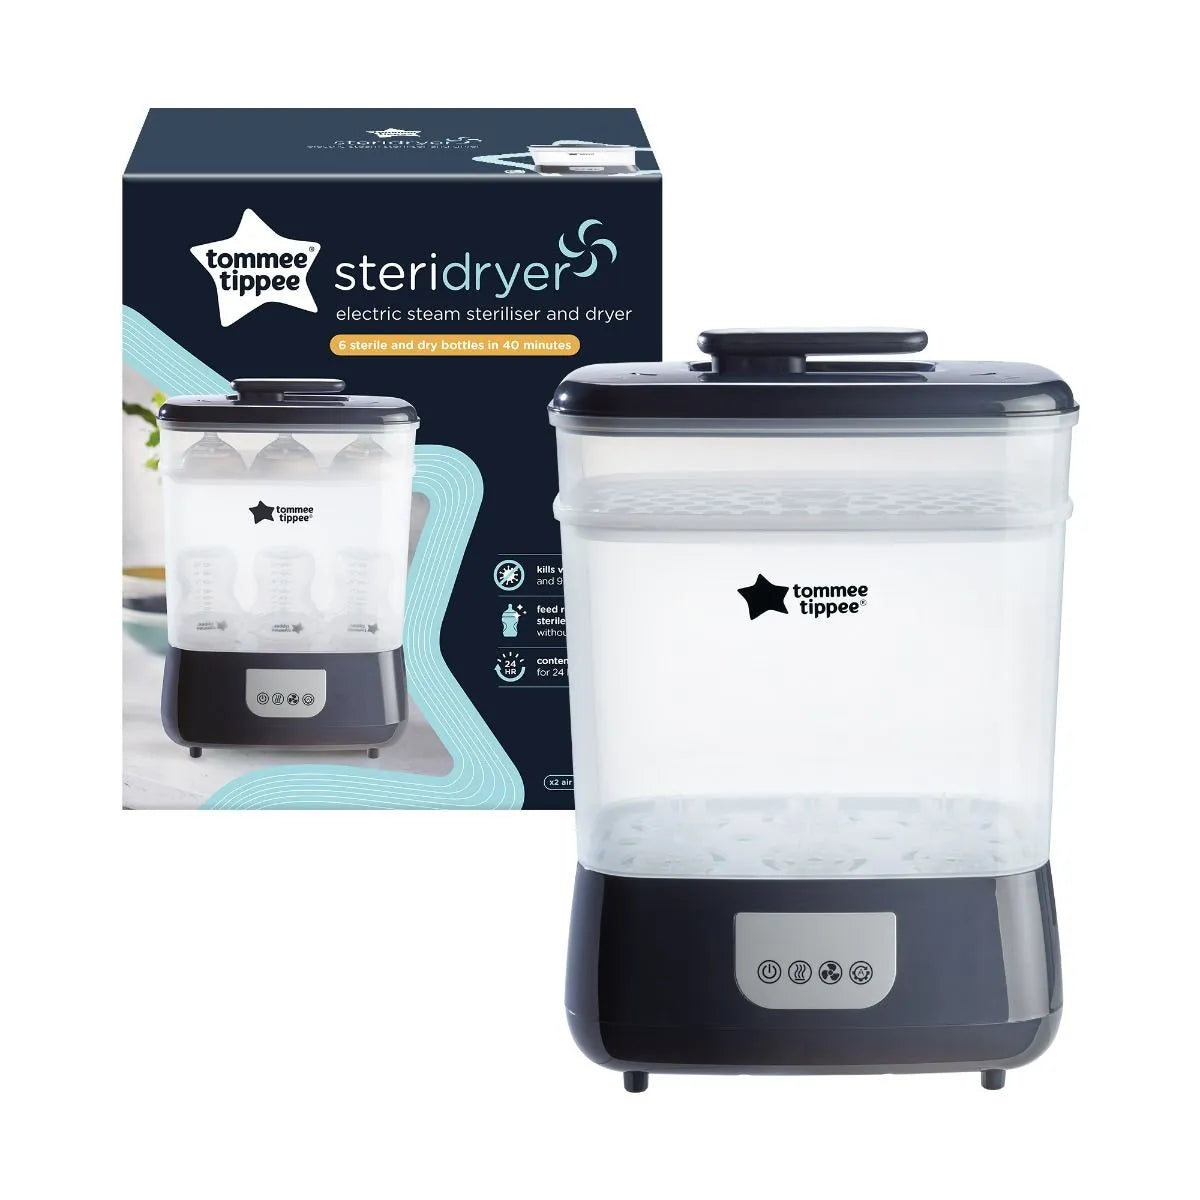 Tommee Tippee Steridryer Electric Steam Sterilizer and Dryer for Baby  Bottles and Accessories, Kills Viruses* and 99.9% of Bacteria, White